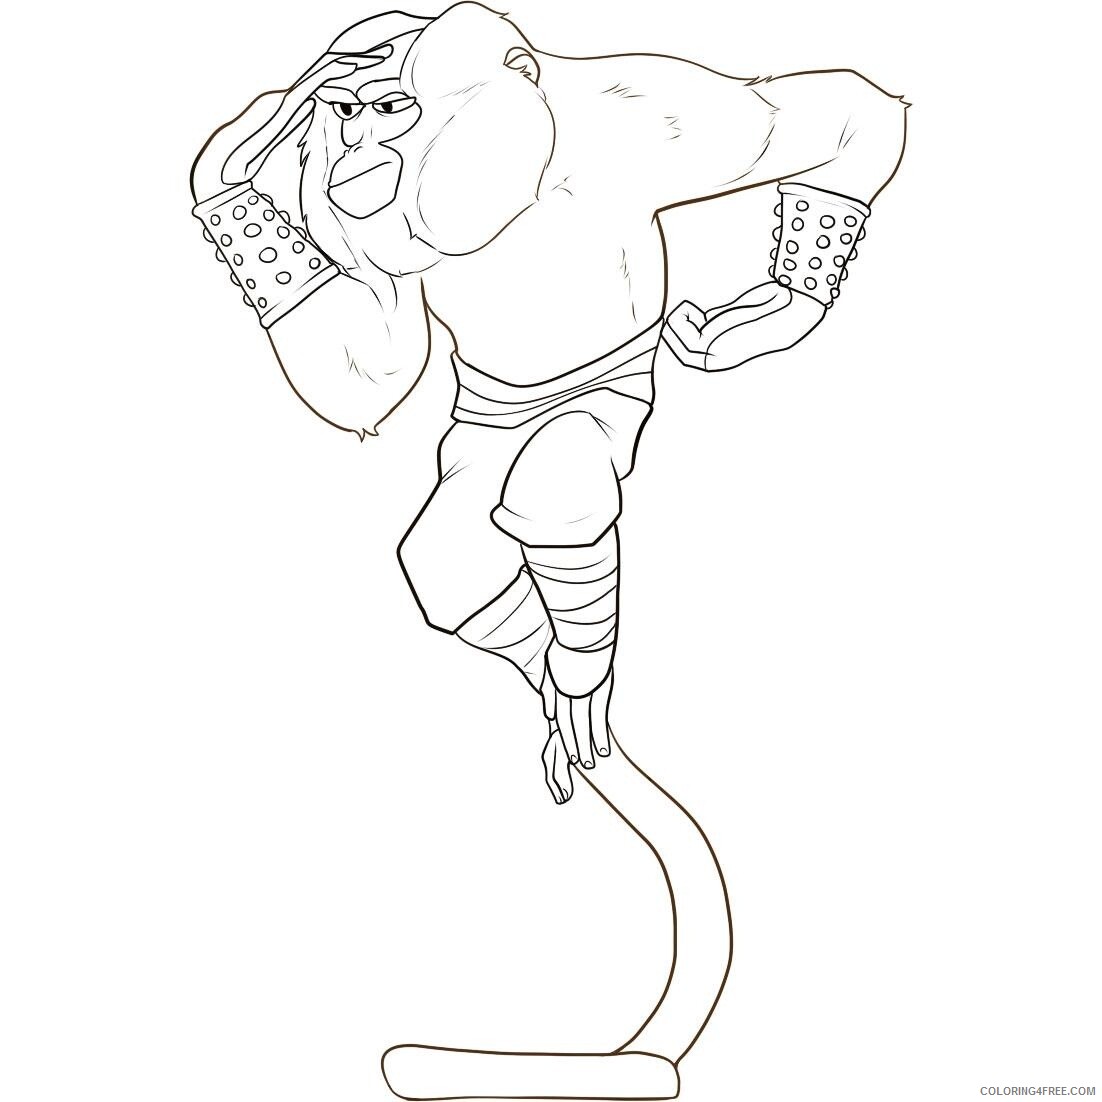 Monkey Coloring Pages Animal Printable Sheets of Monkey 2021 3291 Coloring4free